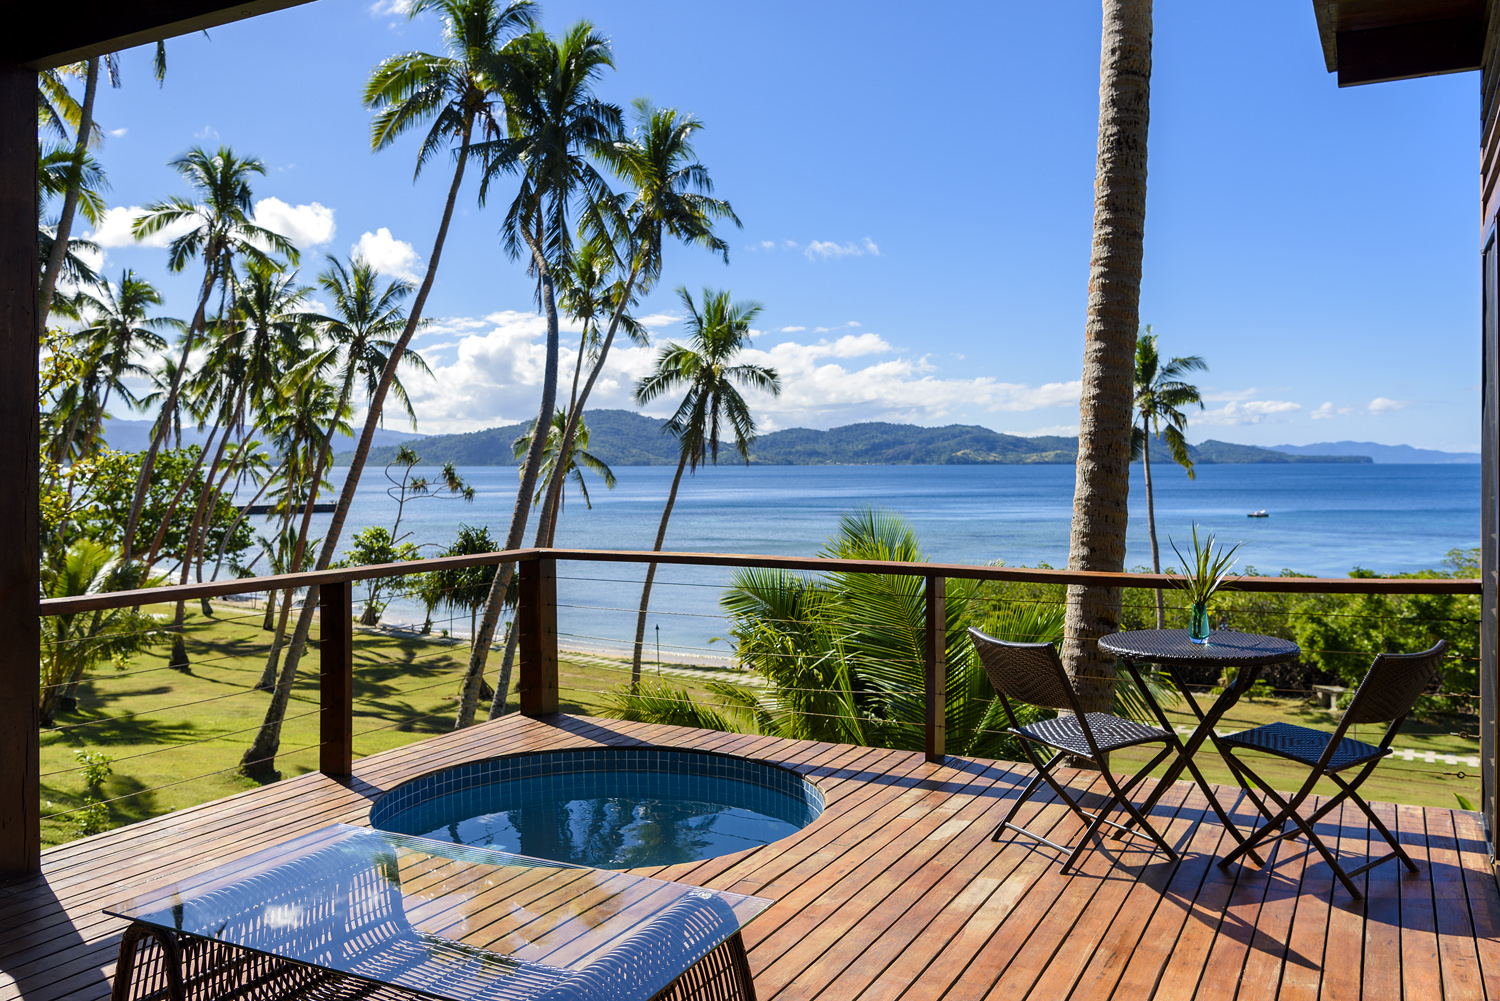 Oceanfront Villa Deck with Ocean views and private plunge pool, The Remote Resort Fiji Islands